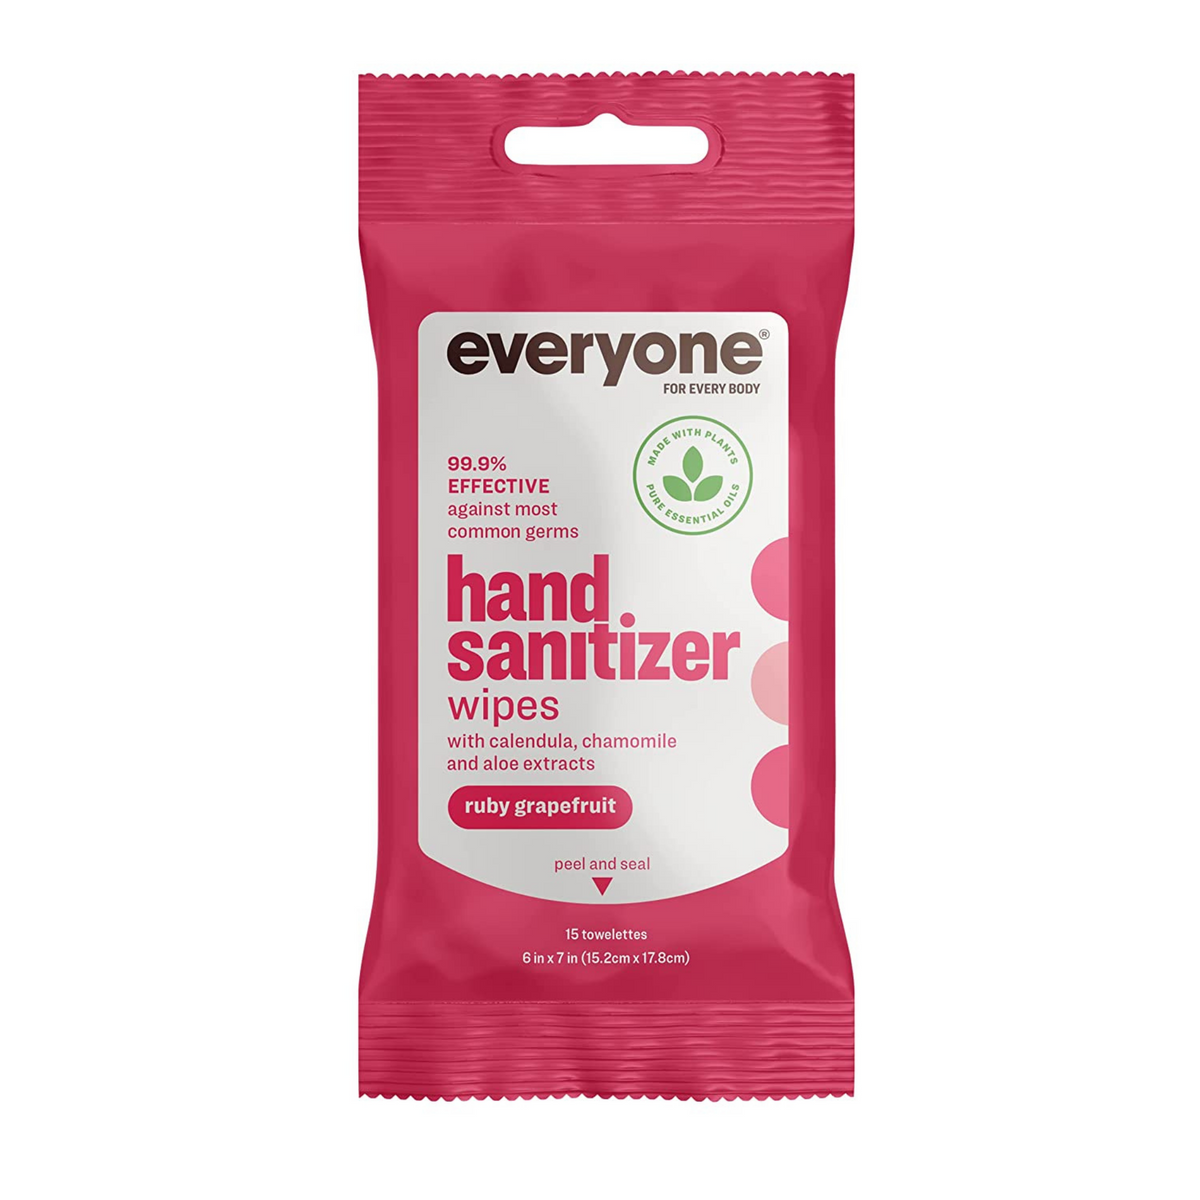 Primary Image of Ruby Grapefruit Hand Sanitizer Wipes